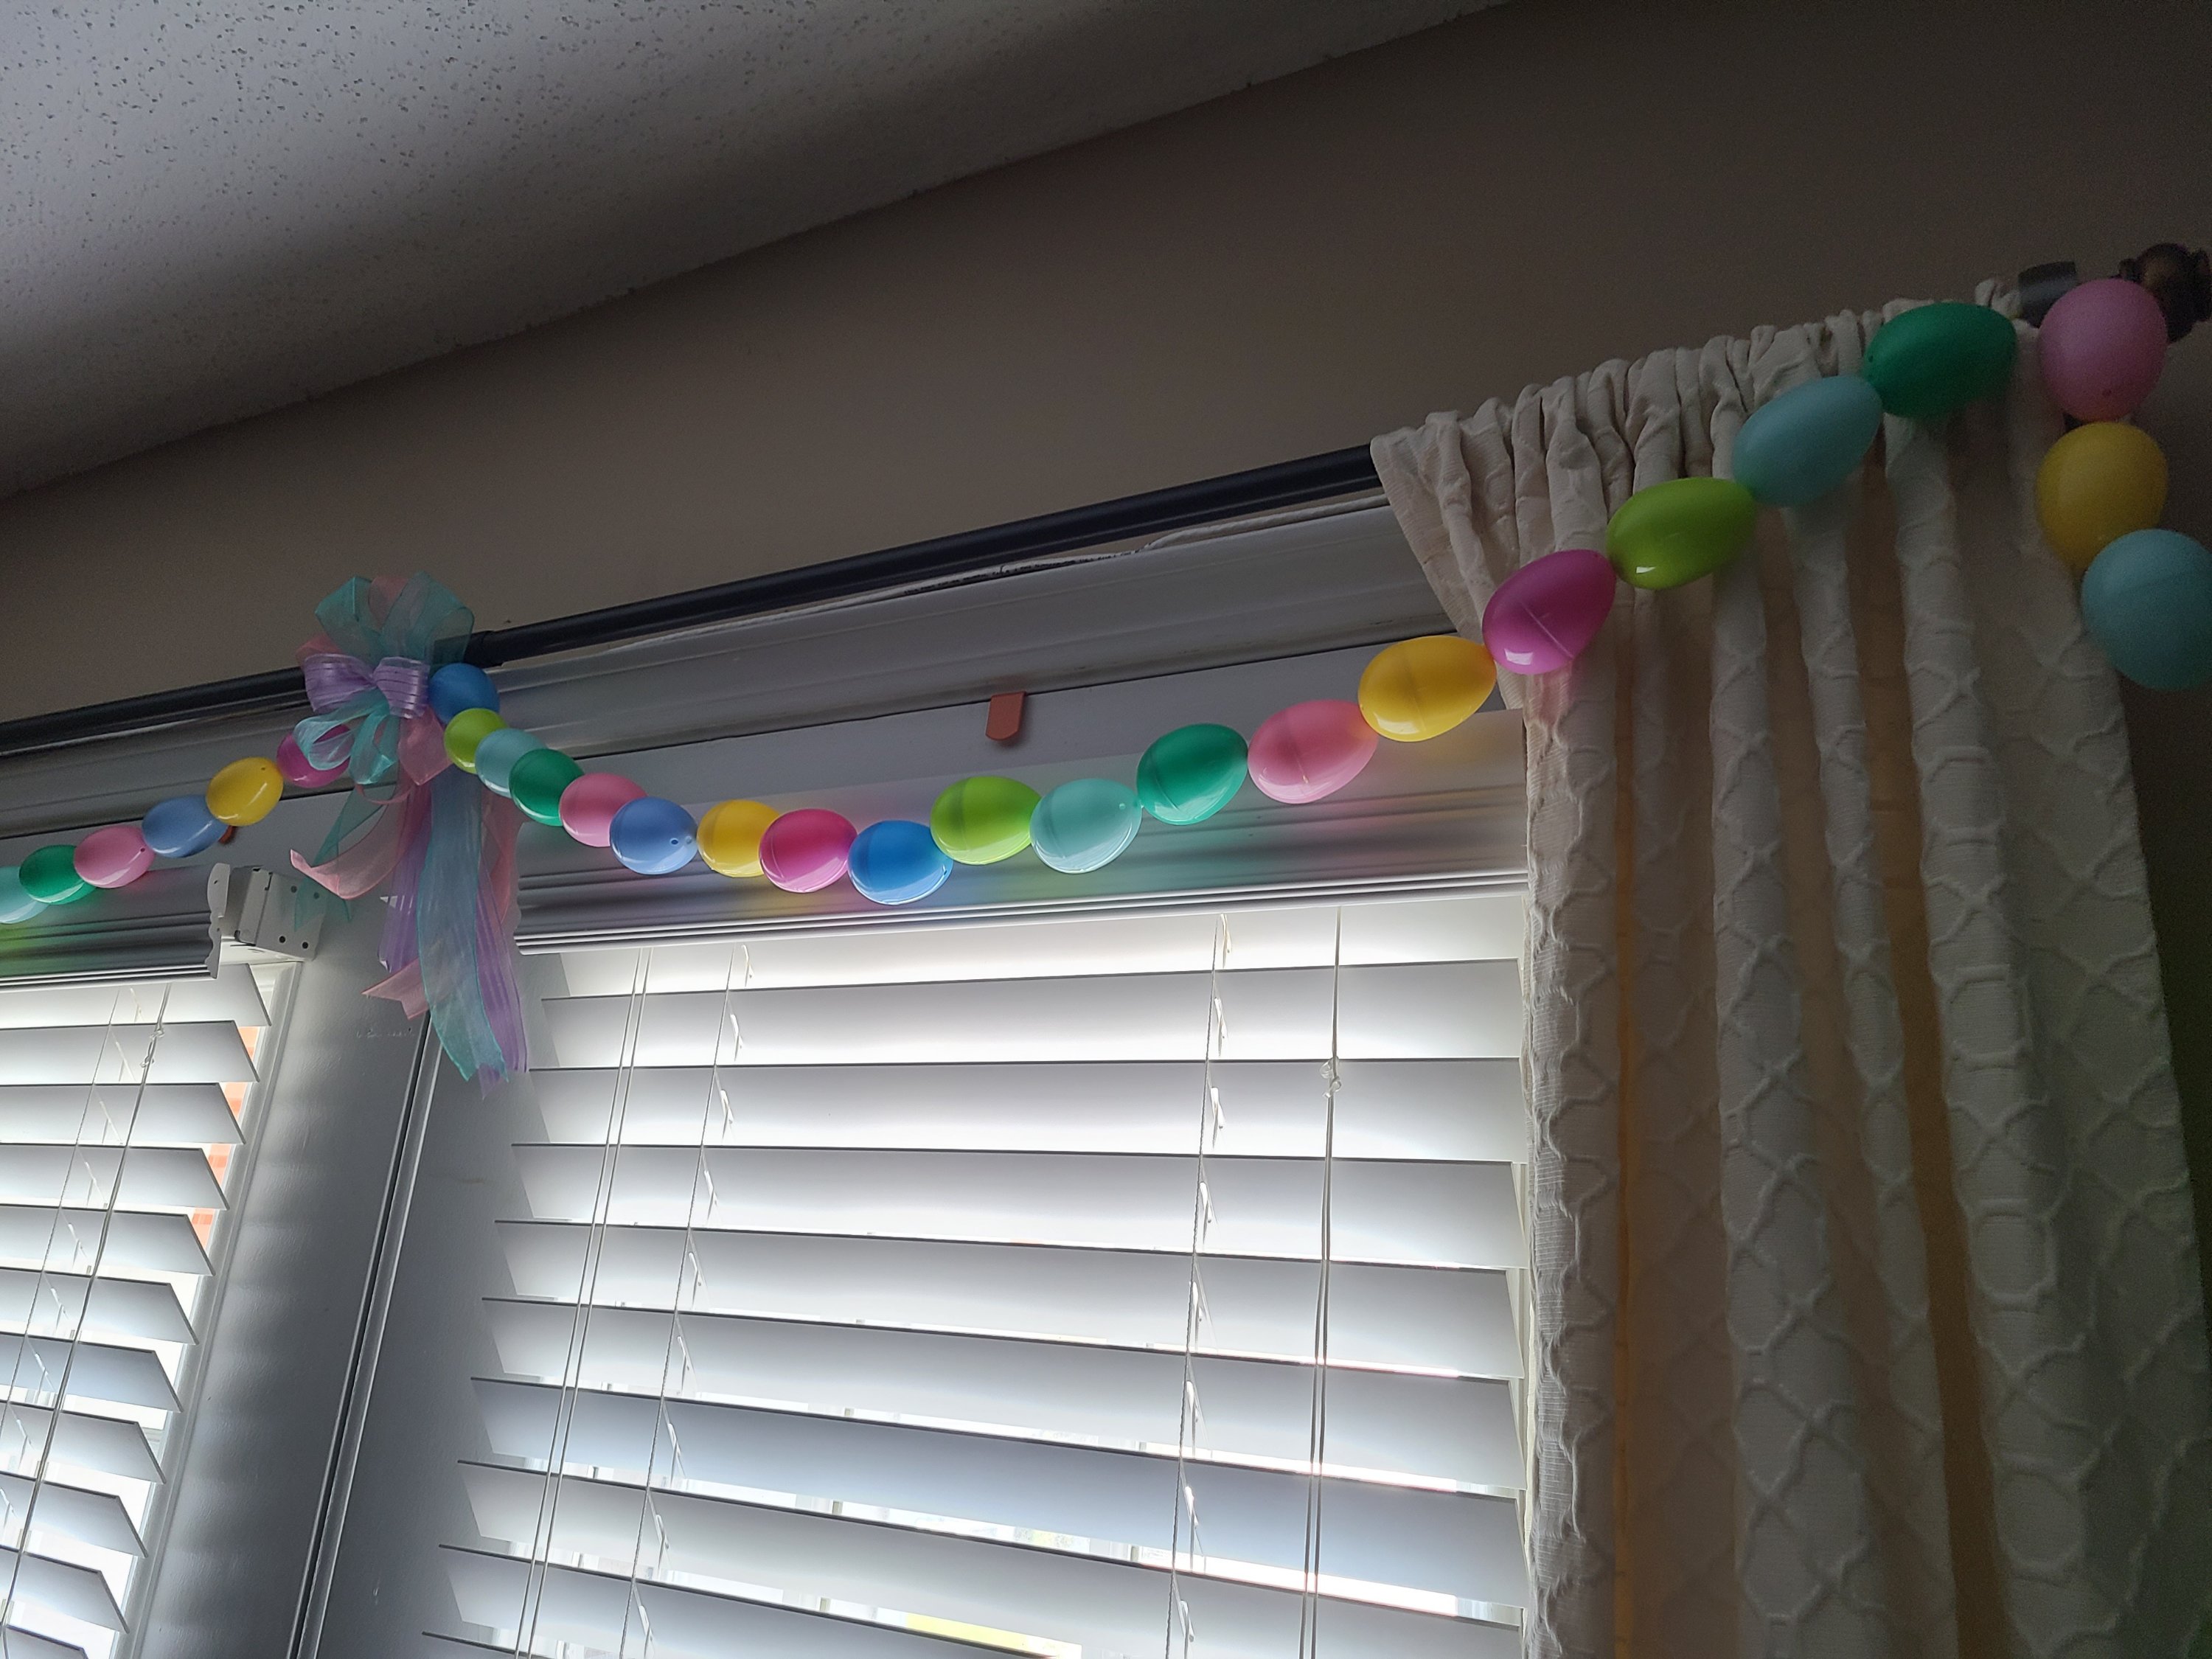 Easter egg garland with a lavender, pink, and aqua bow in the center and colored eggs extending out of each side, with the phot focusing on the right side where the garland drops down the side of ivory curtains.